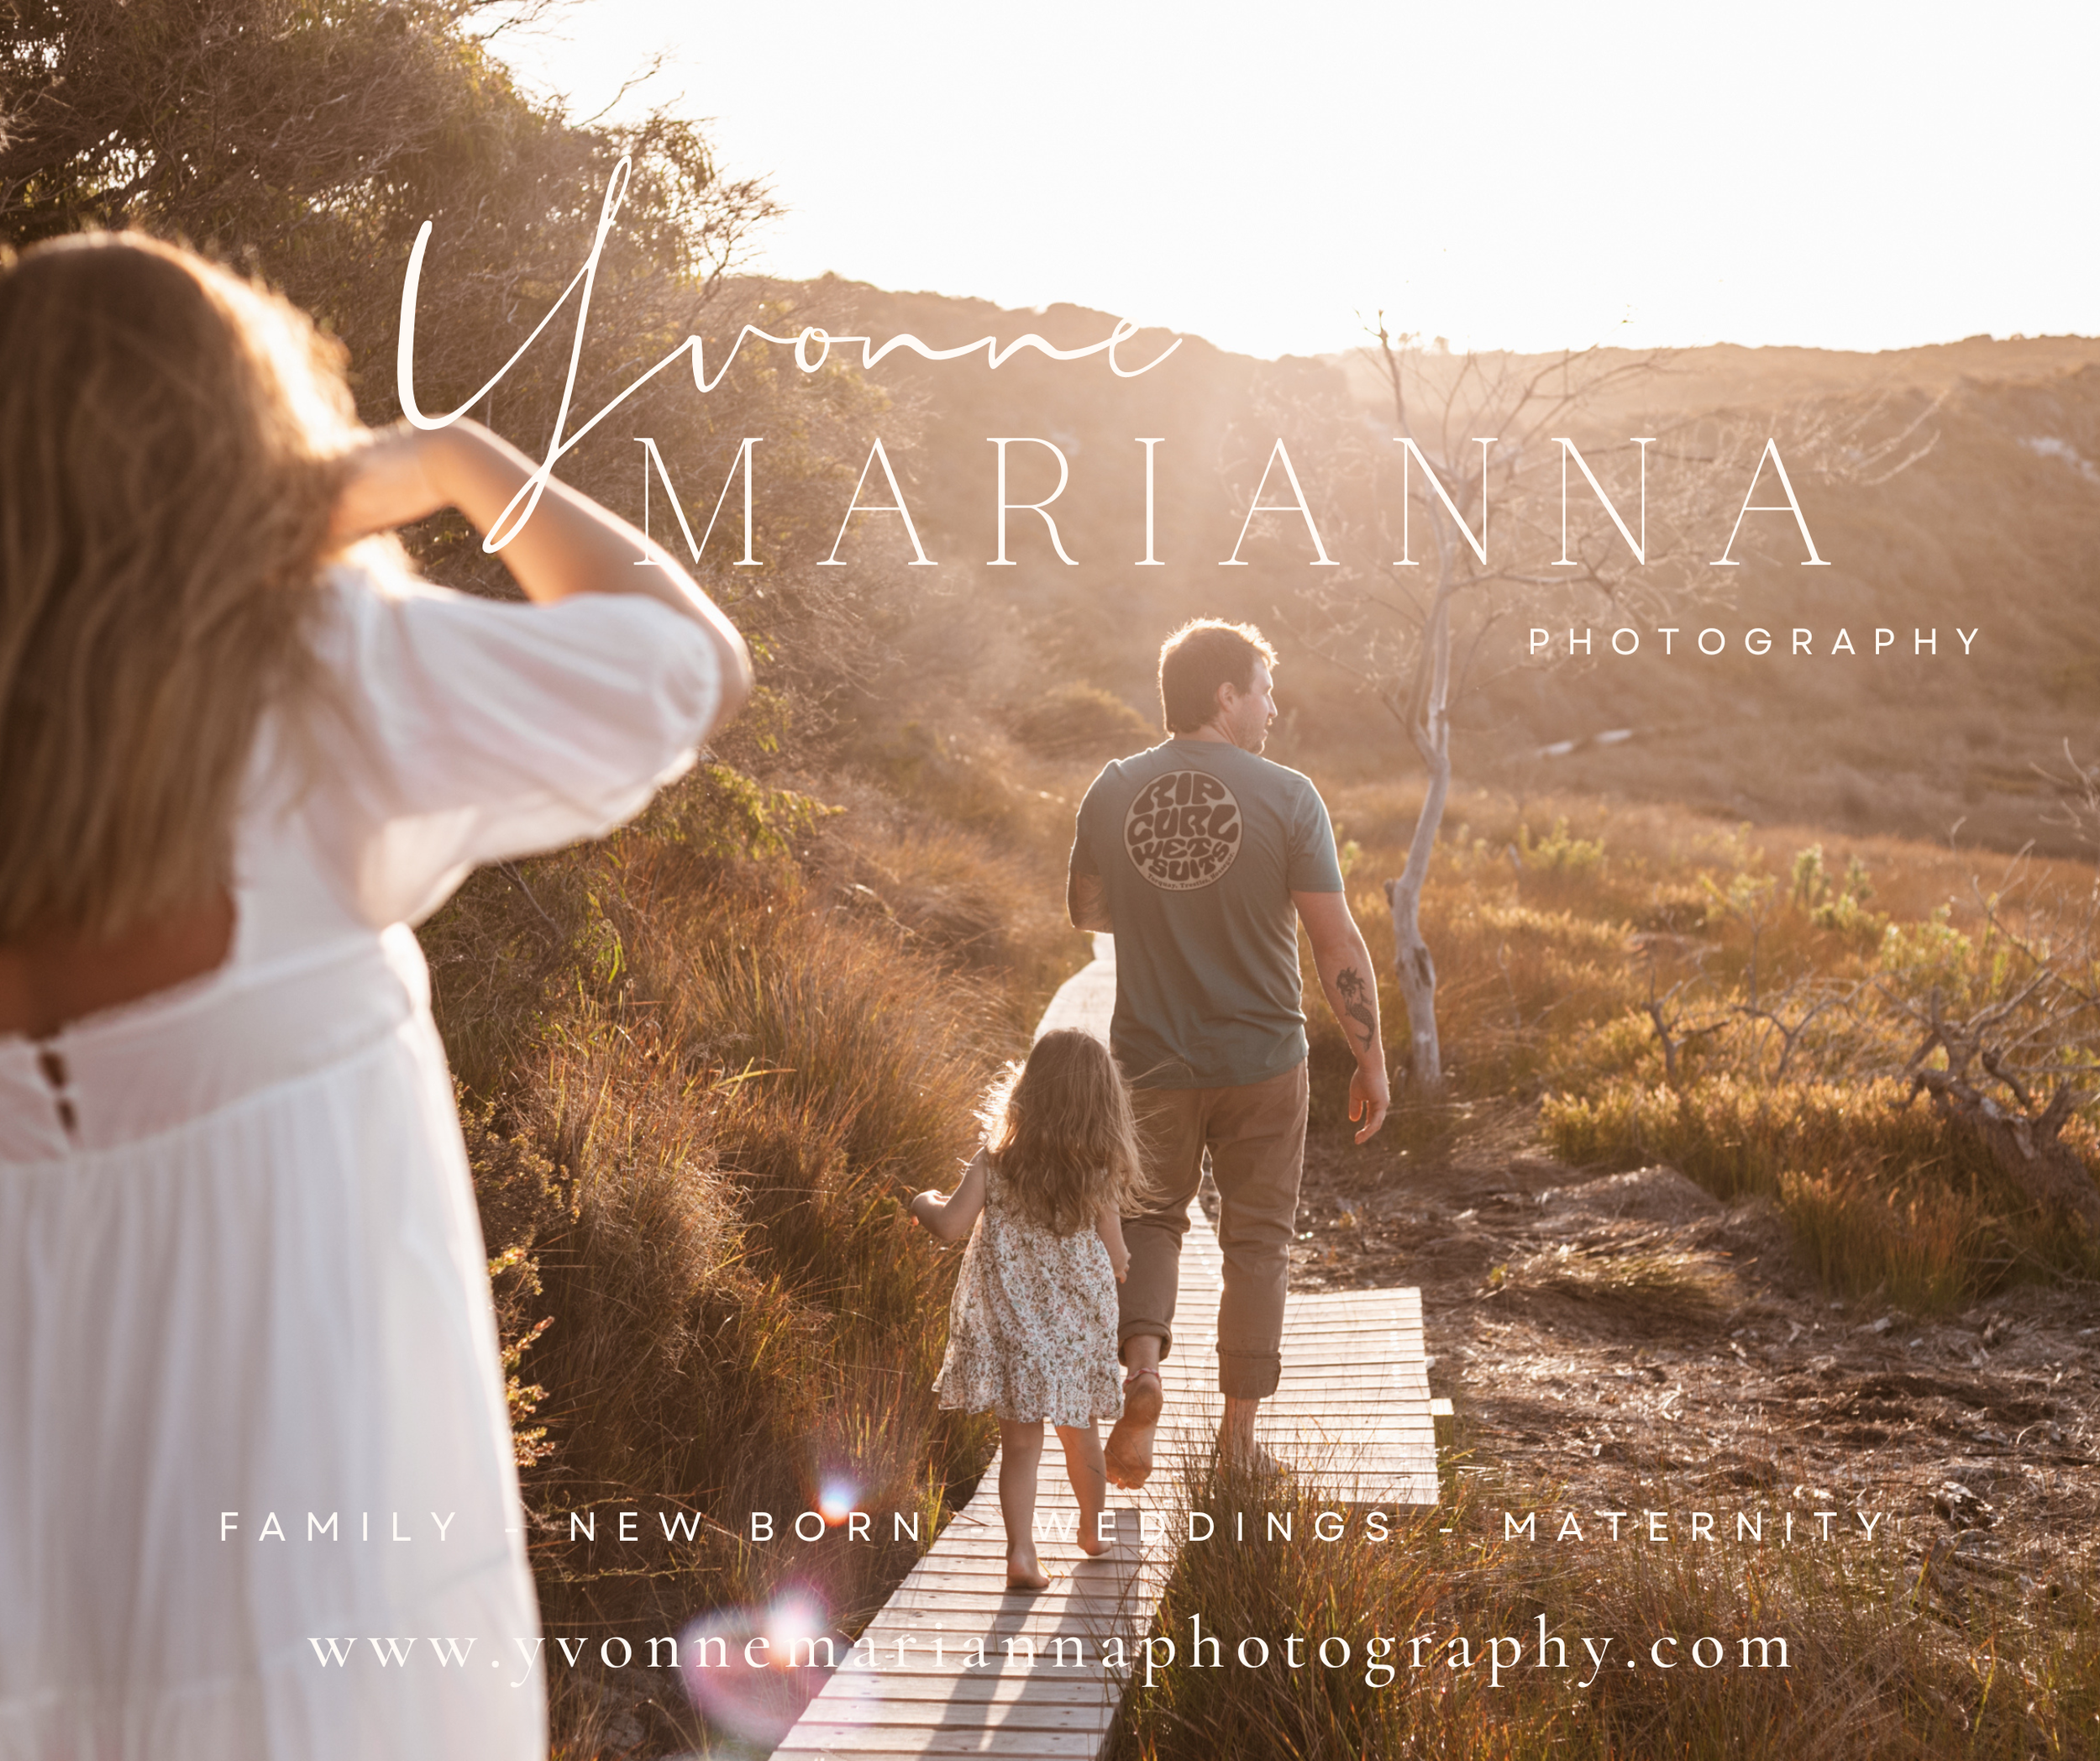 Yvonne Marianna Family Photography 6.png